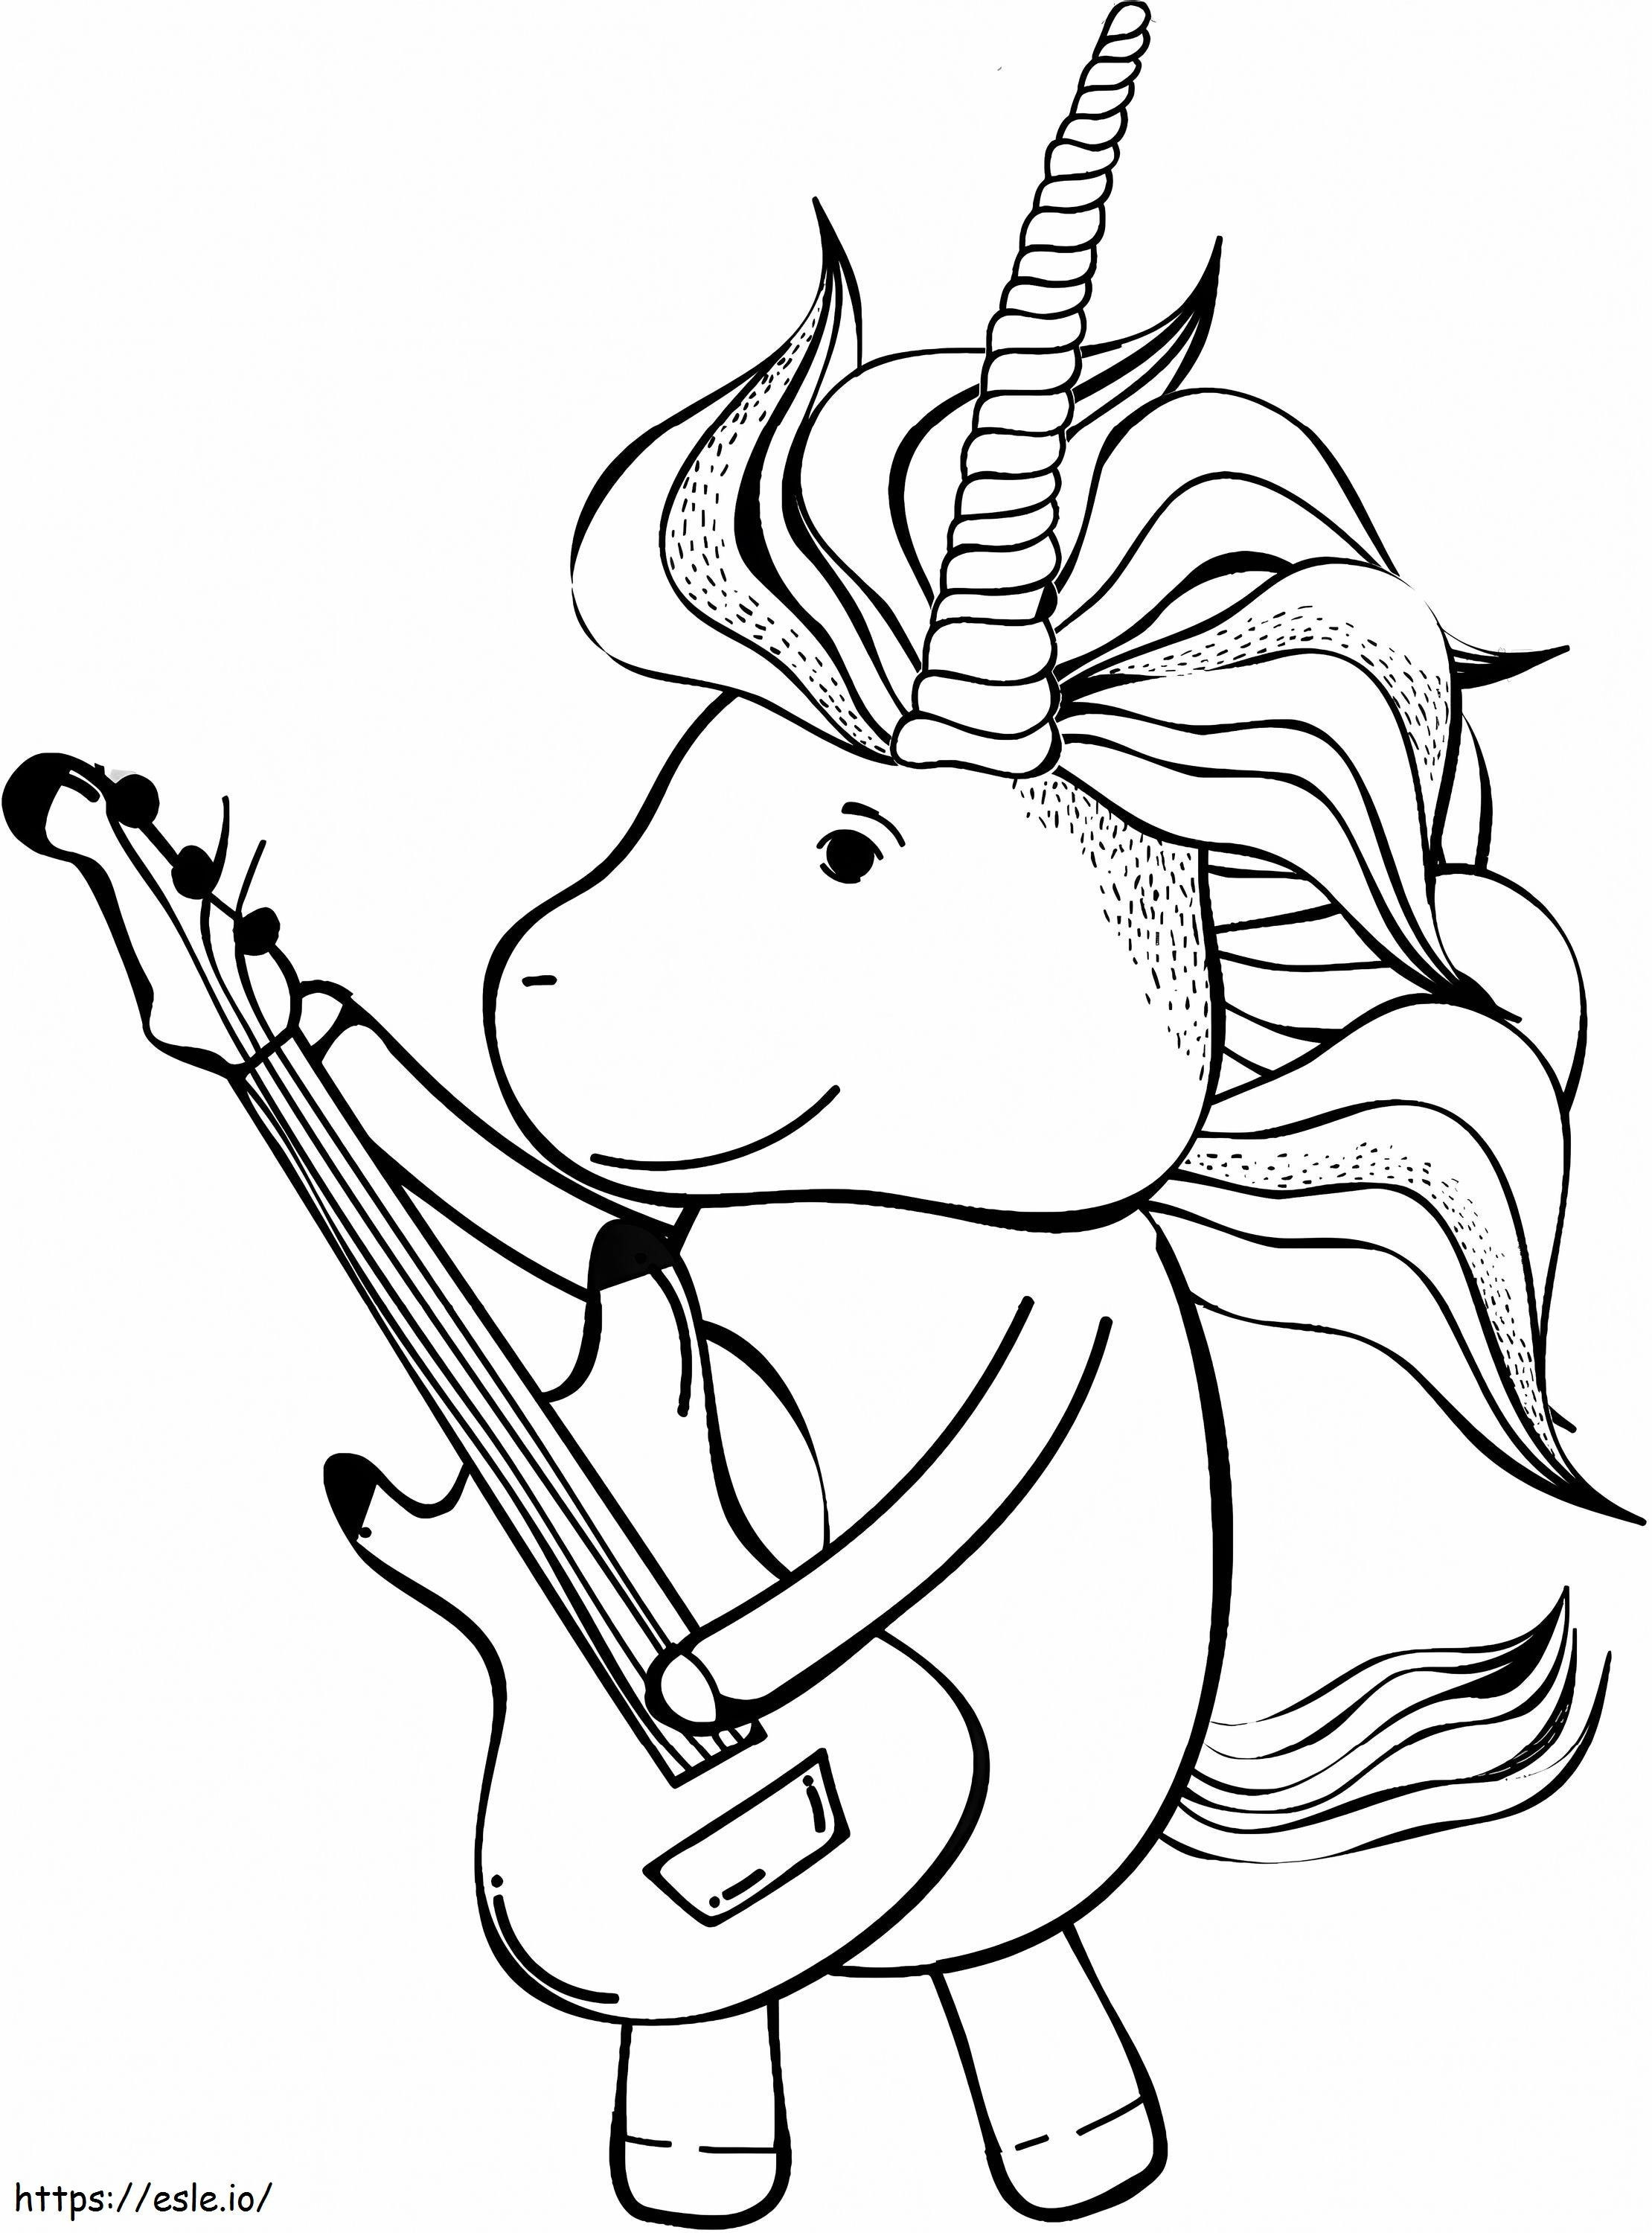 Unicorn Playing Guitar A4 coloring page